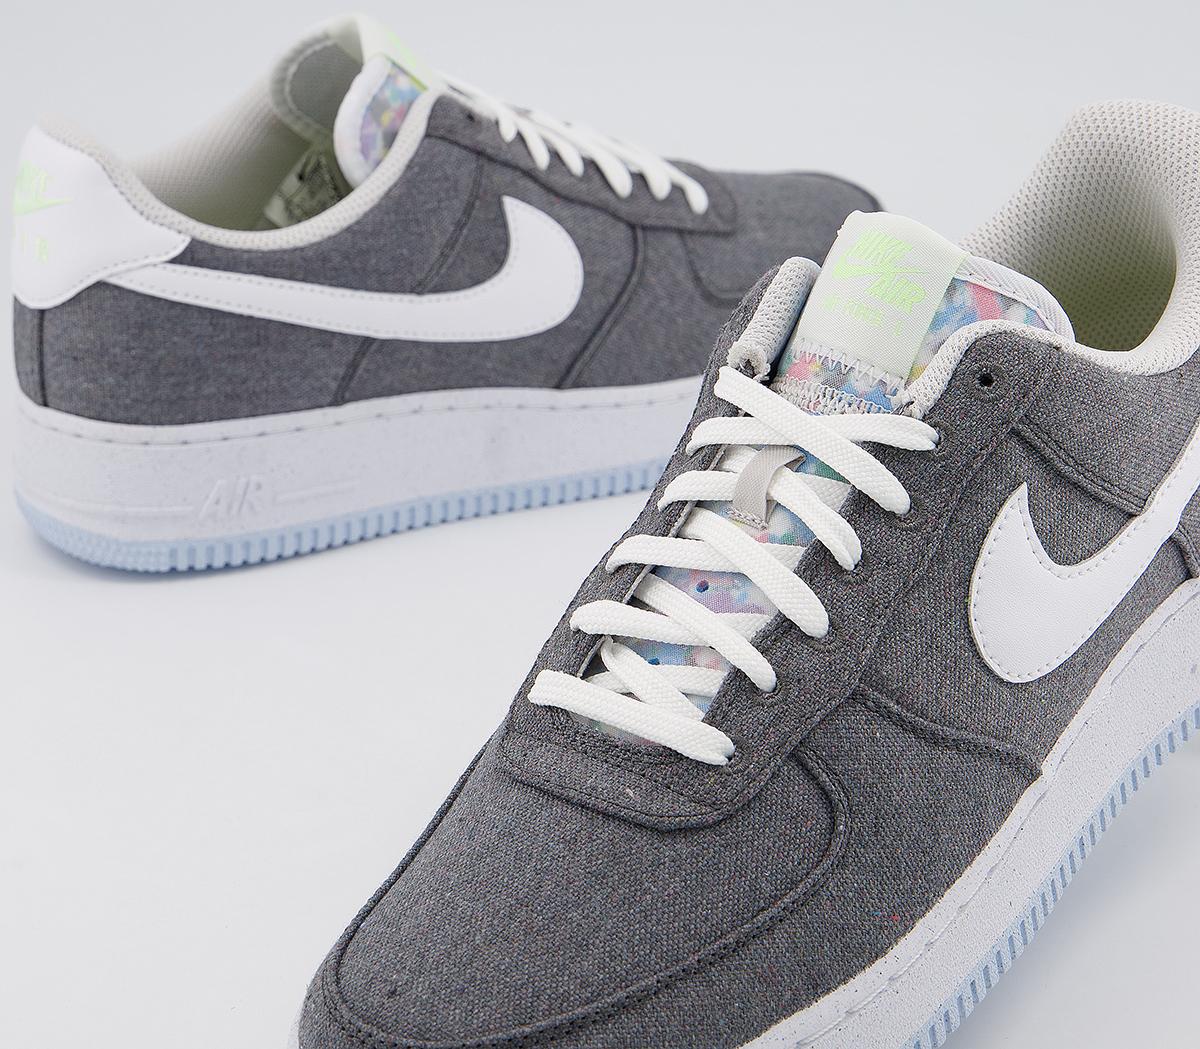 Nike Air Force 1 07 Trainers Iron Grey White Barely Volt Celestine Blue ...